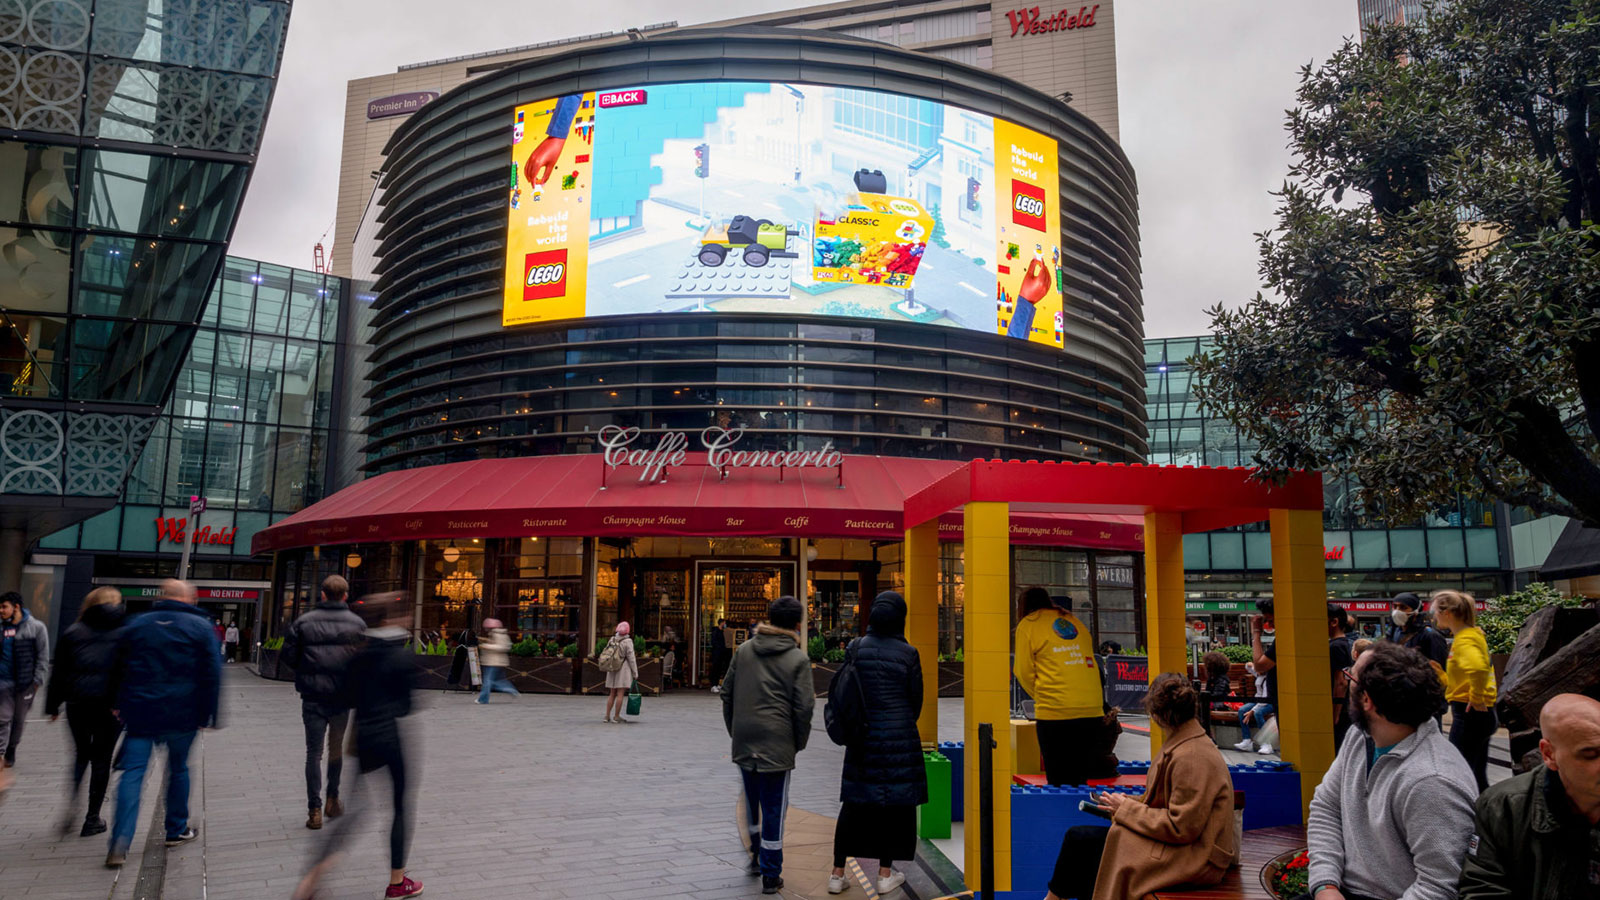 Lego interactive haptic experience at Westfield Stratford